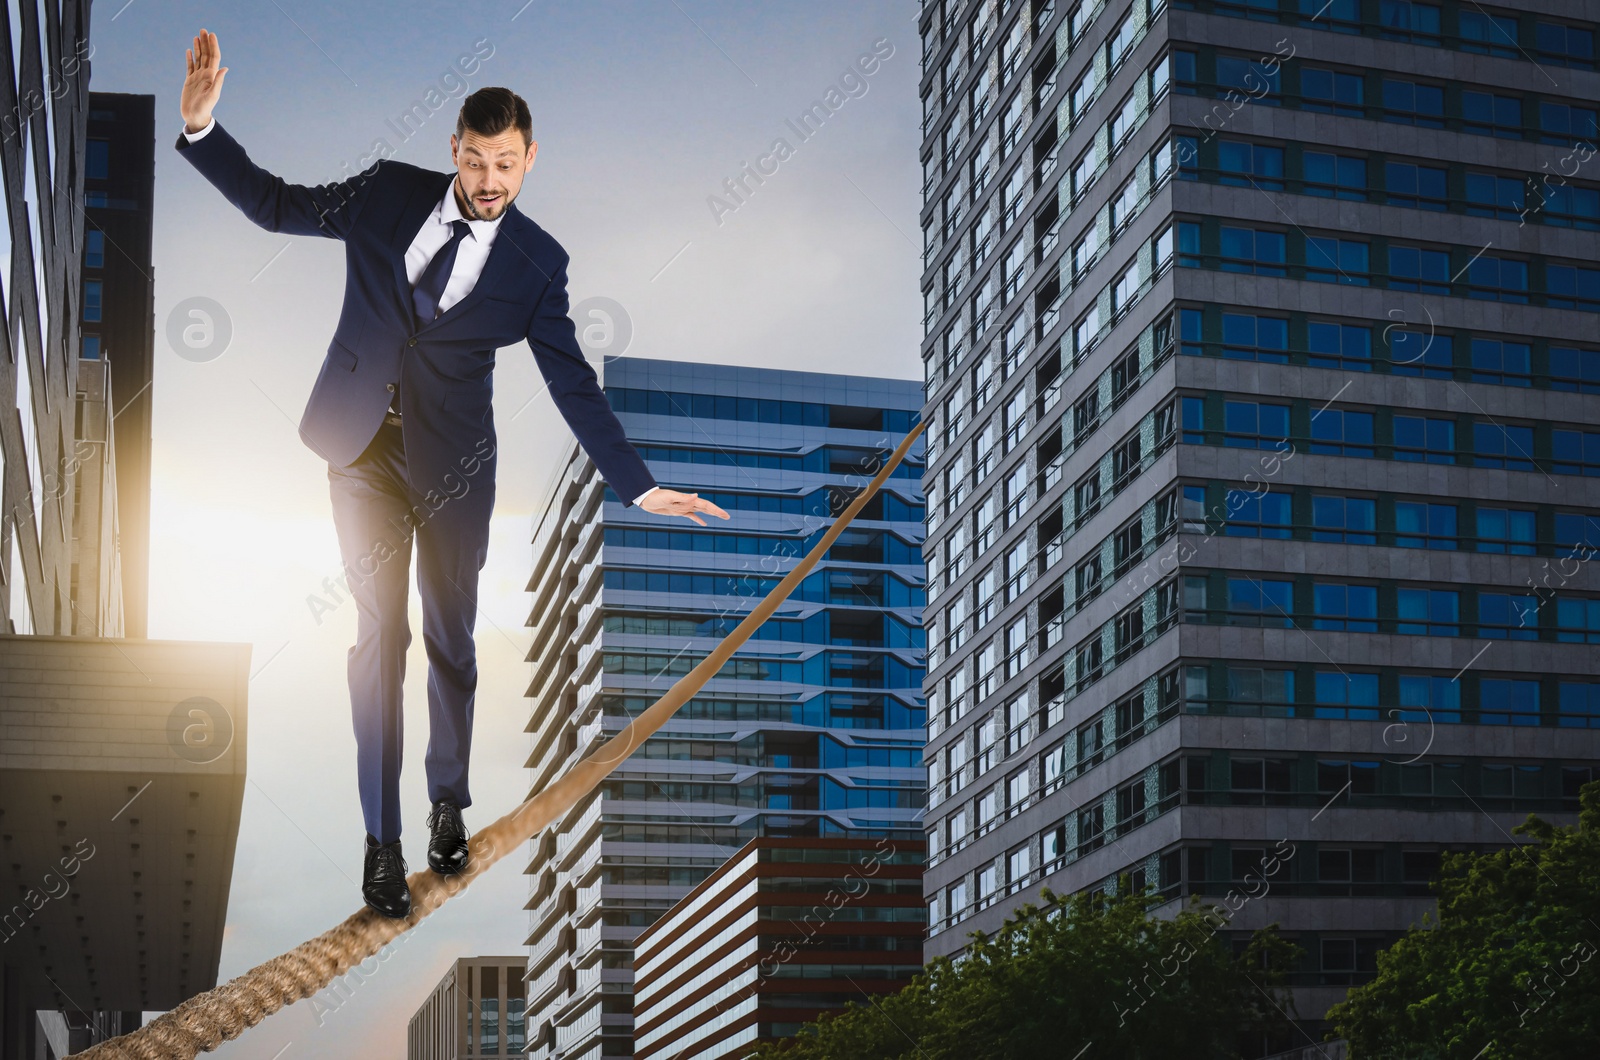 Image of Risks and challenges of entrepreneurship. Businessman balancing on rope in city